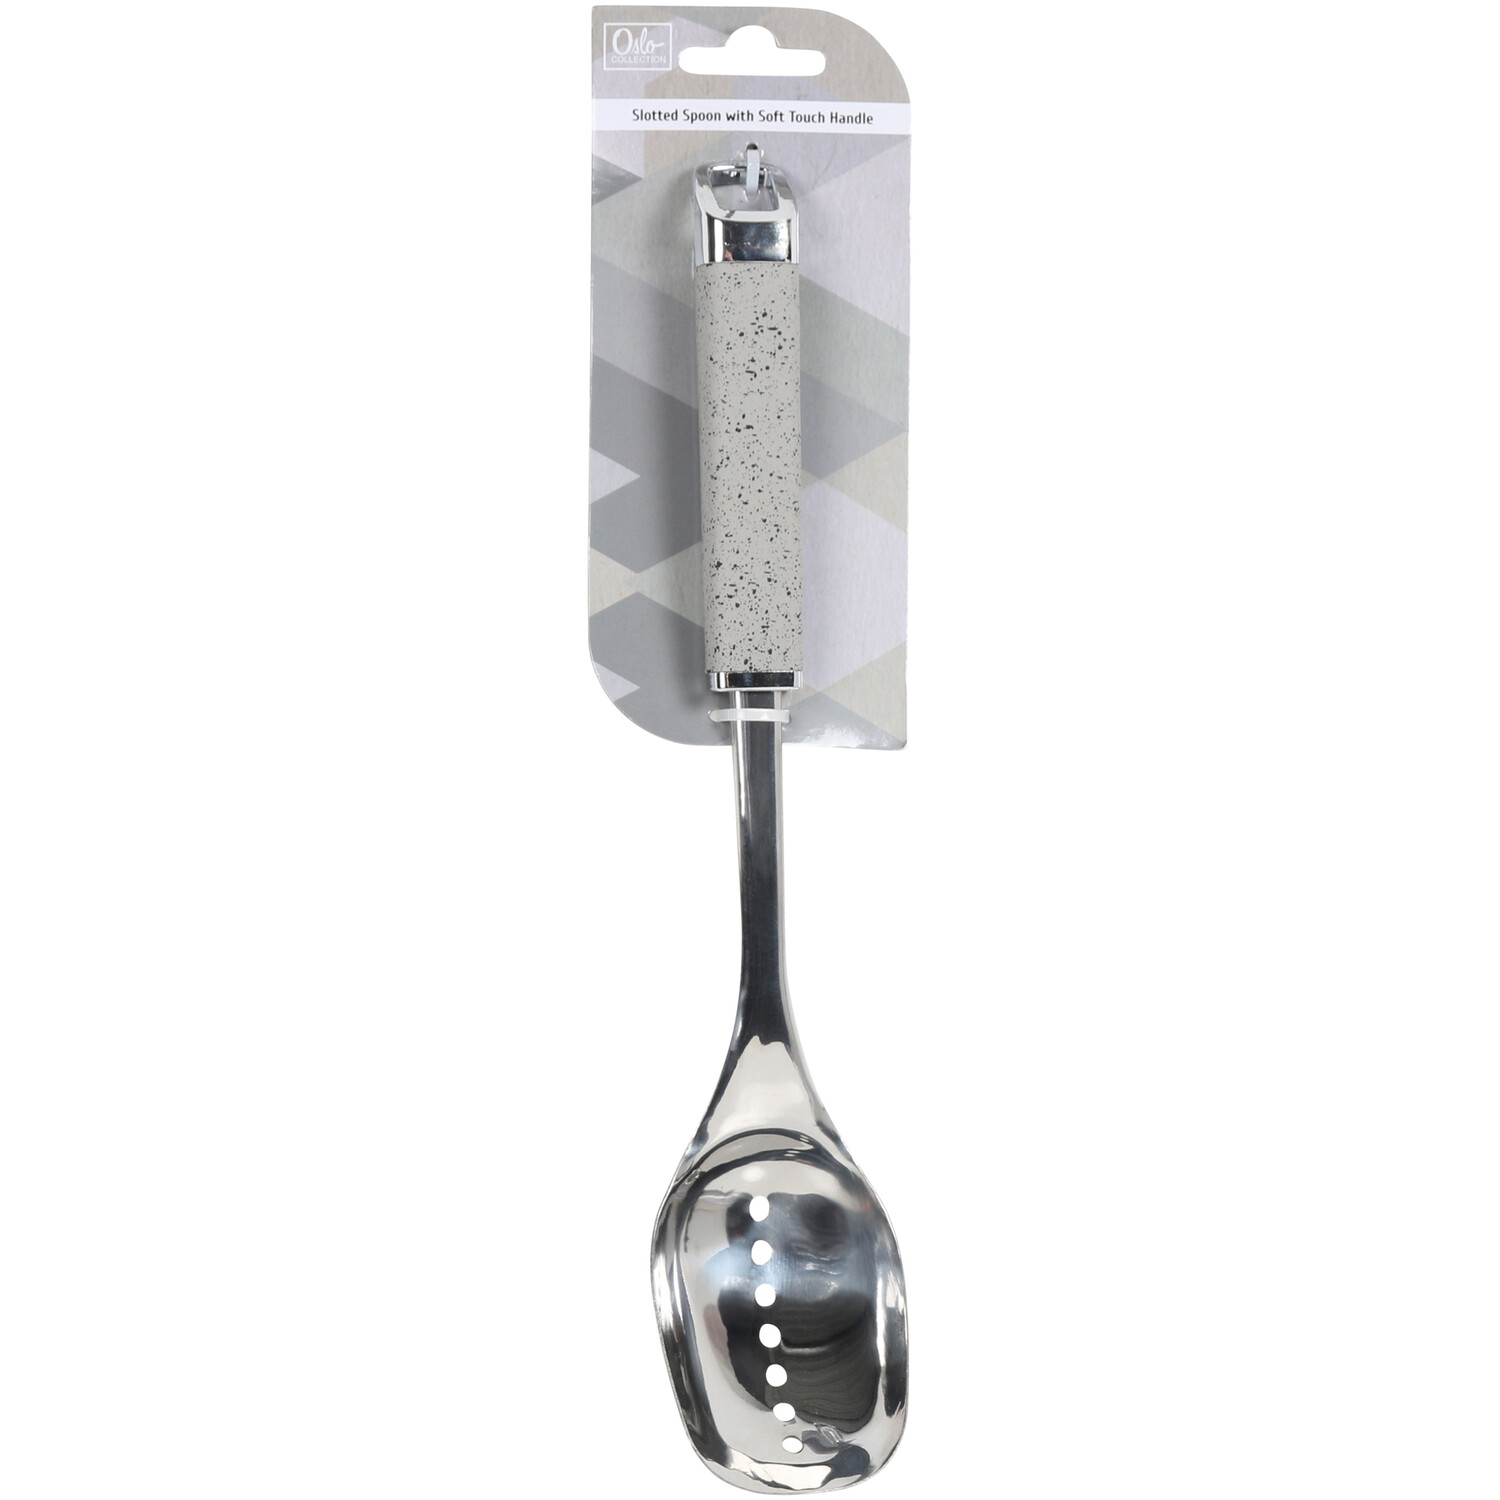 Oslo Slotted Spoon - Grey Image 1